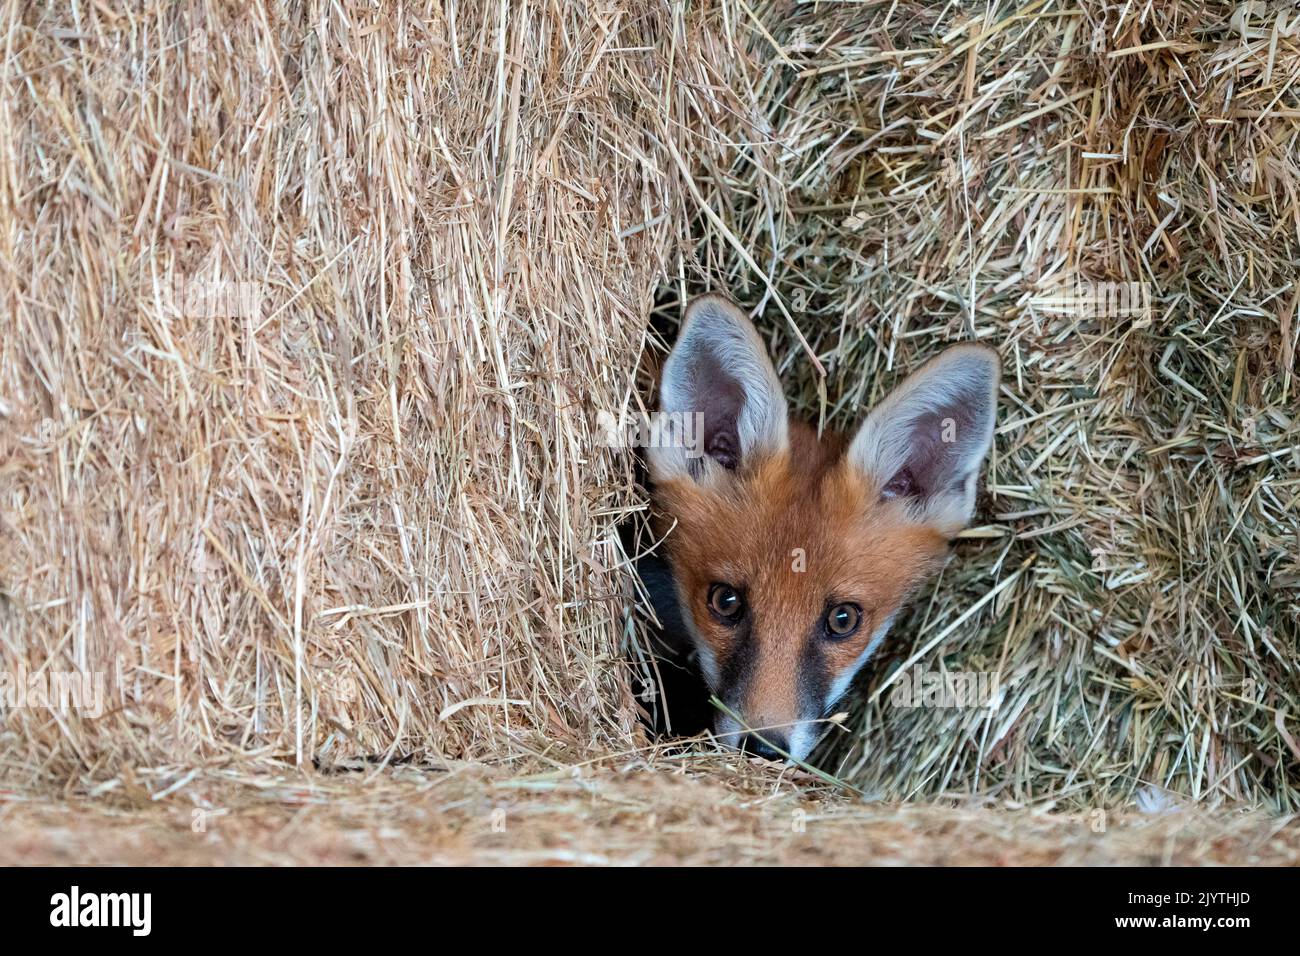 Red fox (Vulpes vulpes) coming out his den in Hay barn, England Stock Photo